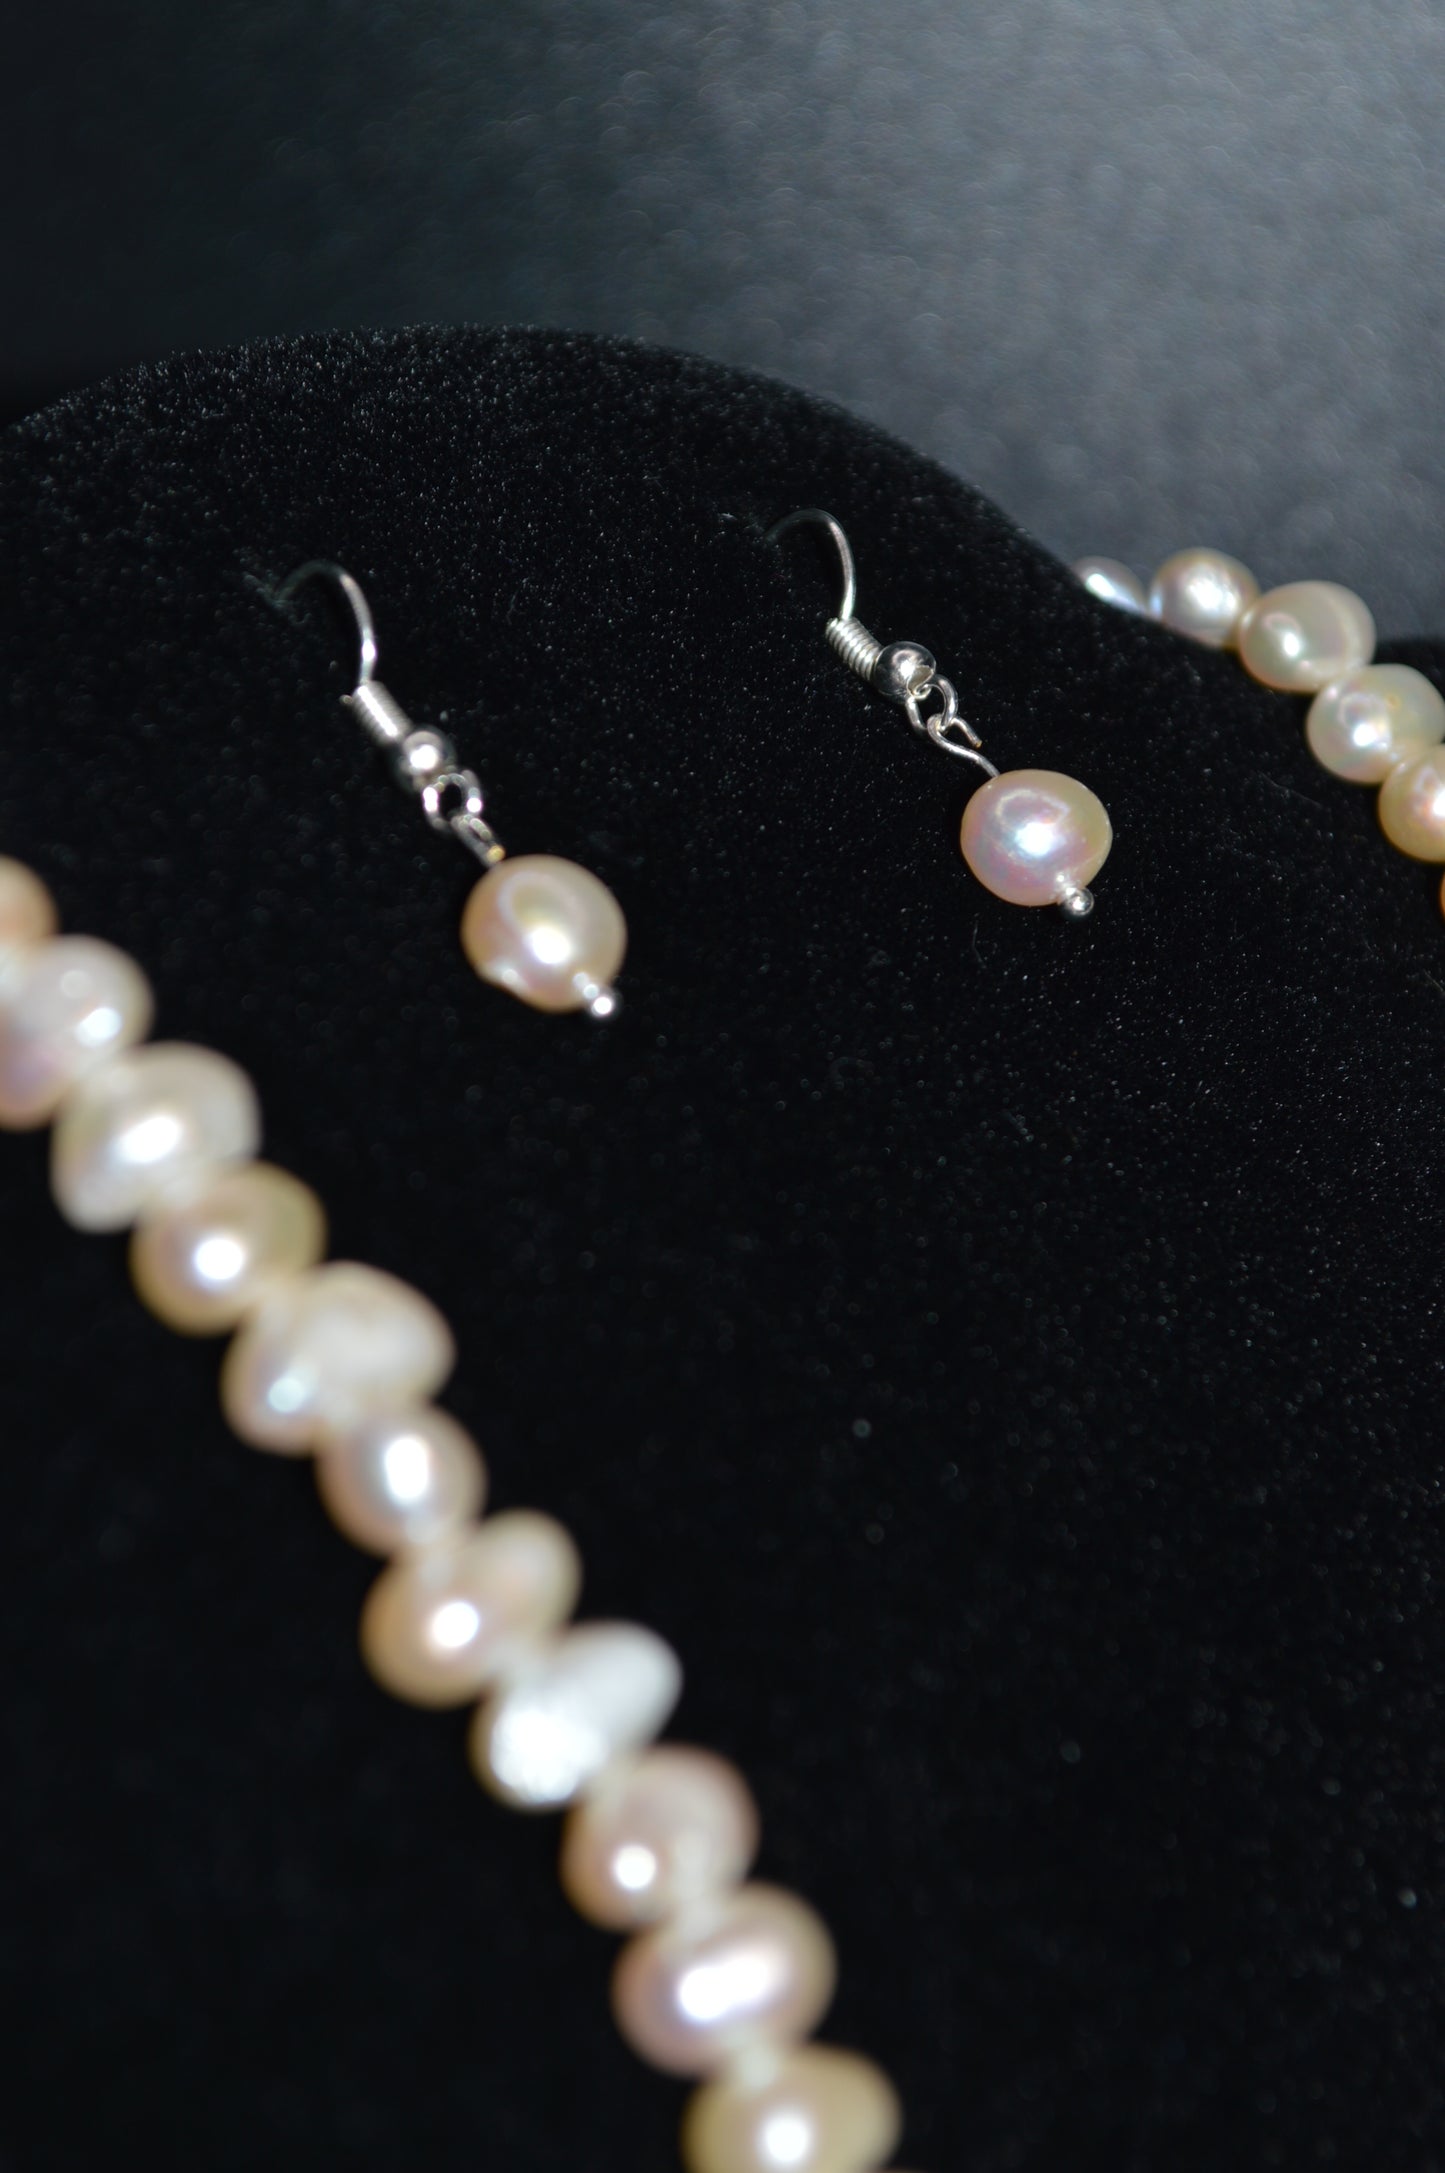 Freshwater Cultured Pearl Necklace and Earring Set (Peach)